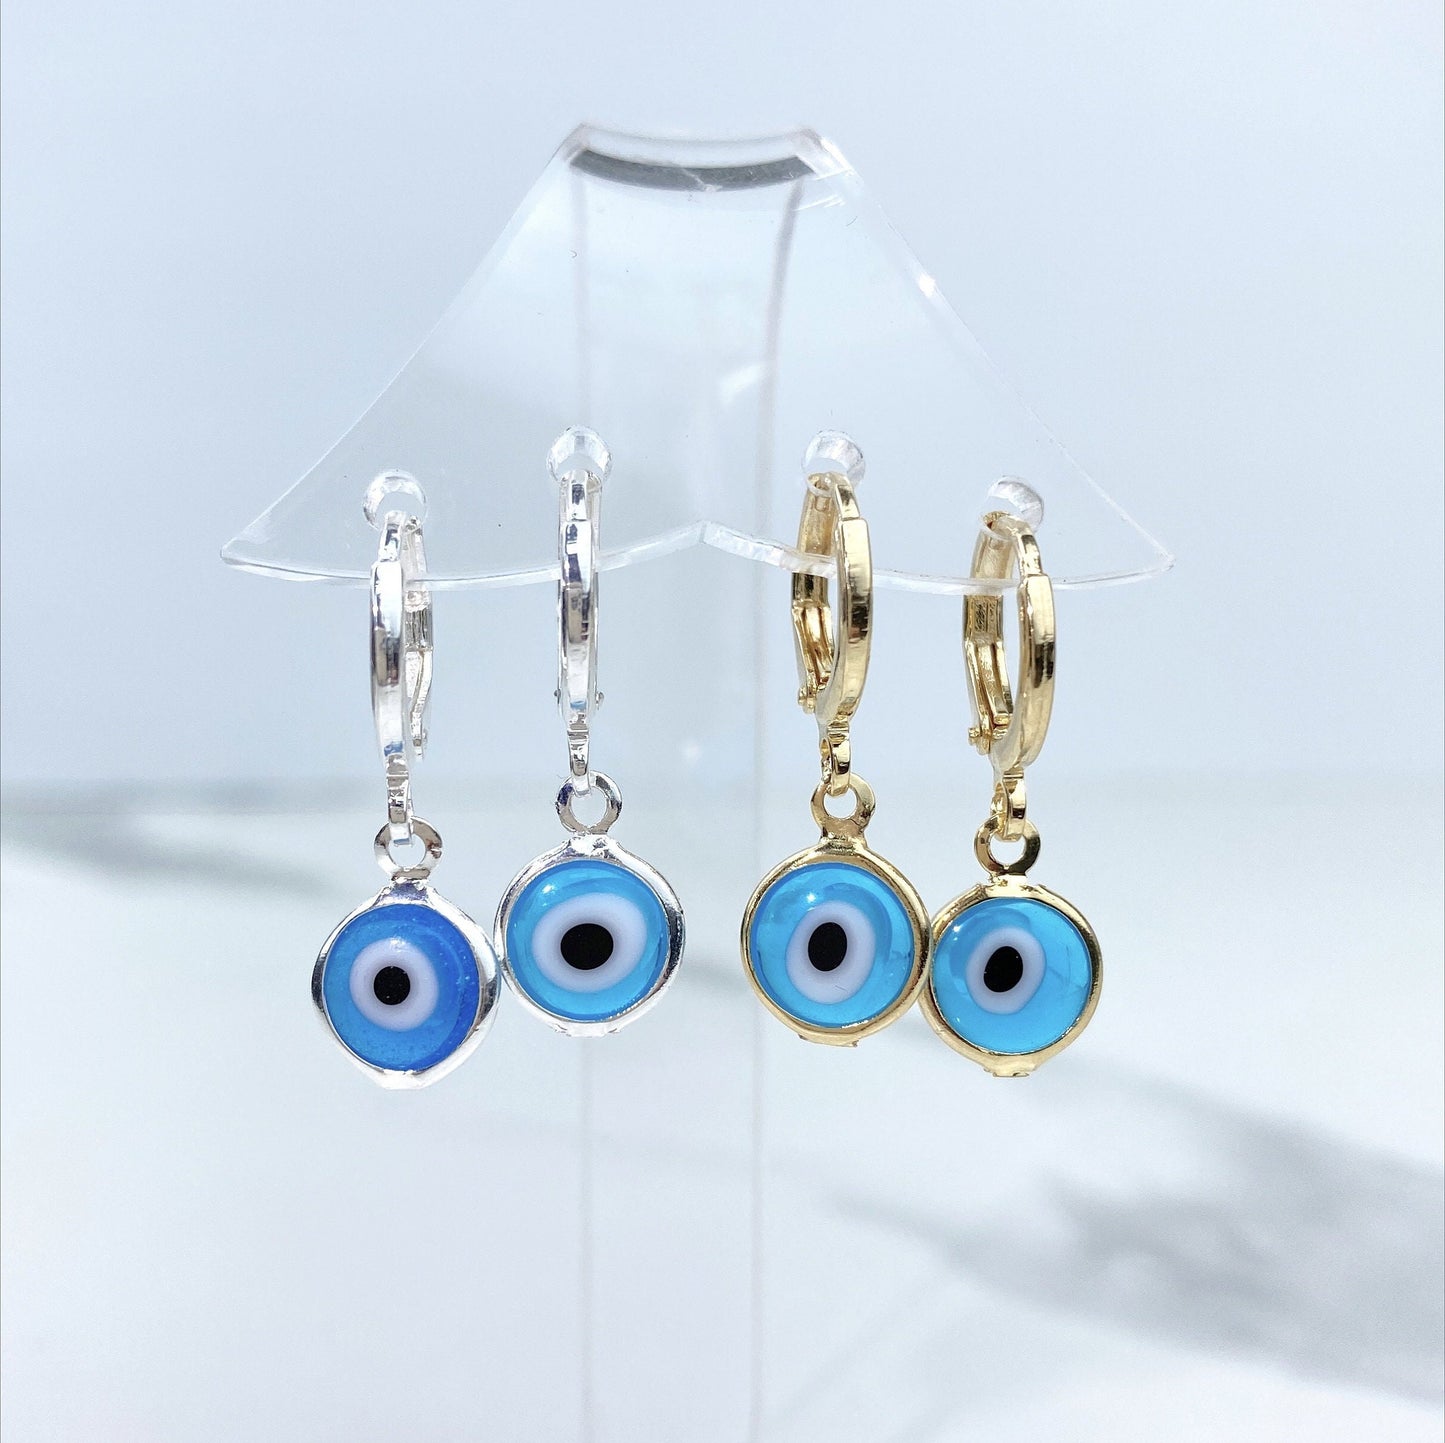 18k Gold Filled Dangling Earrings Featuring 12mm Greek Blue Eyes, Protection & Lucky Earrings, Wholesale Jewelry Making Supplies